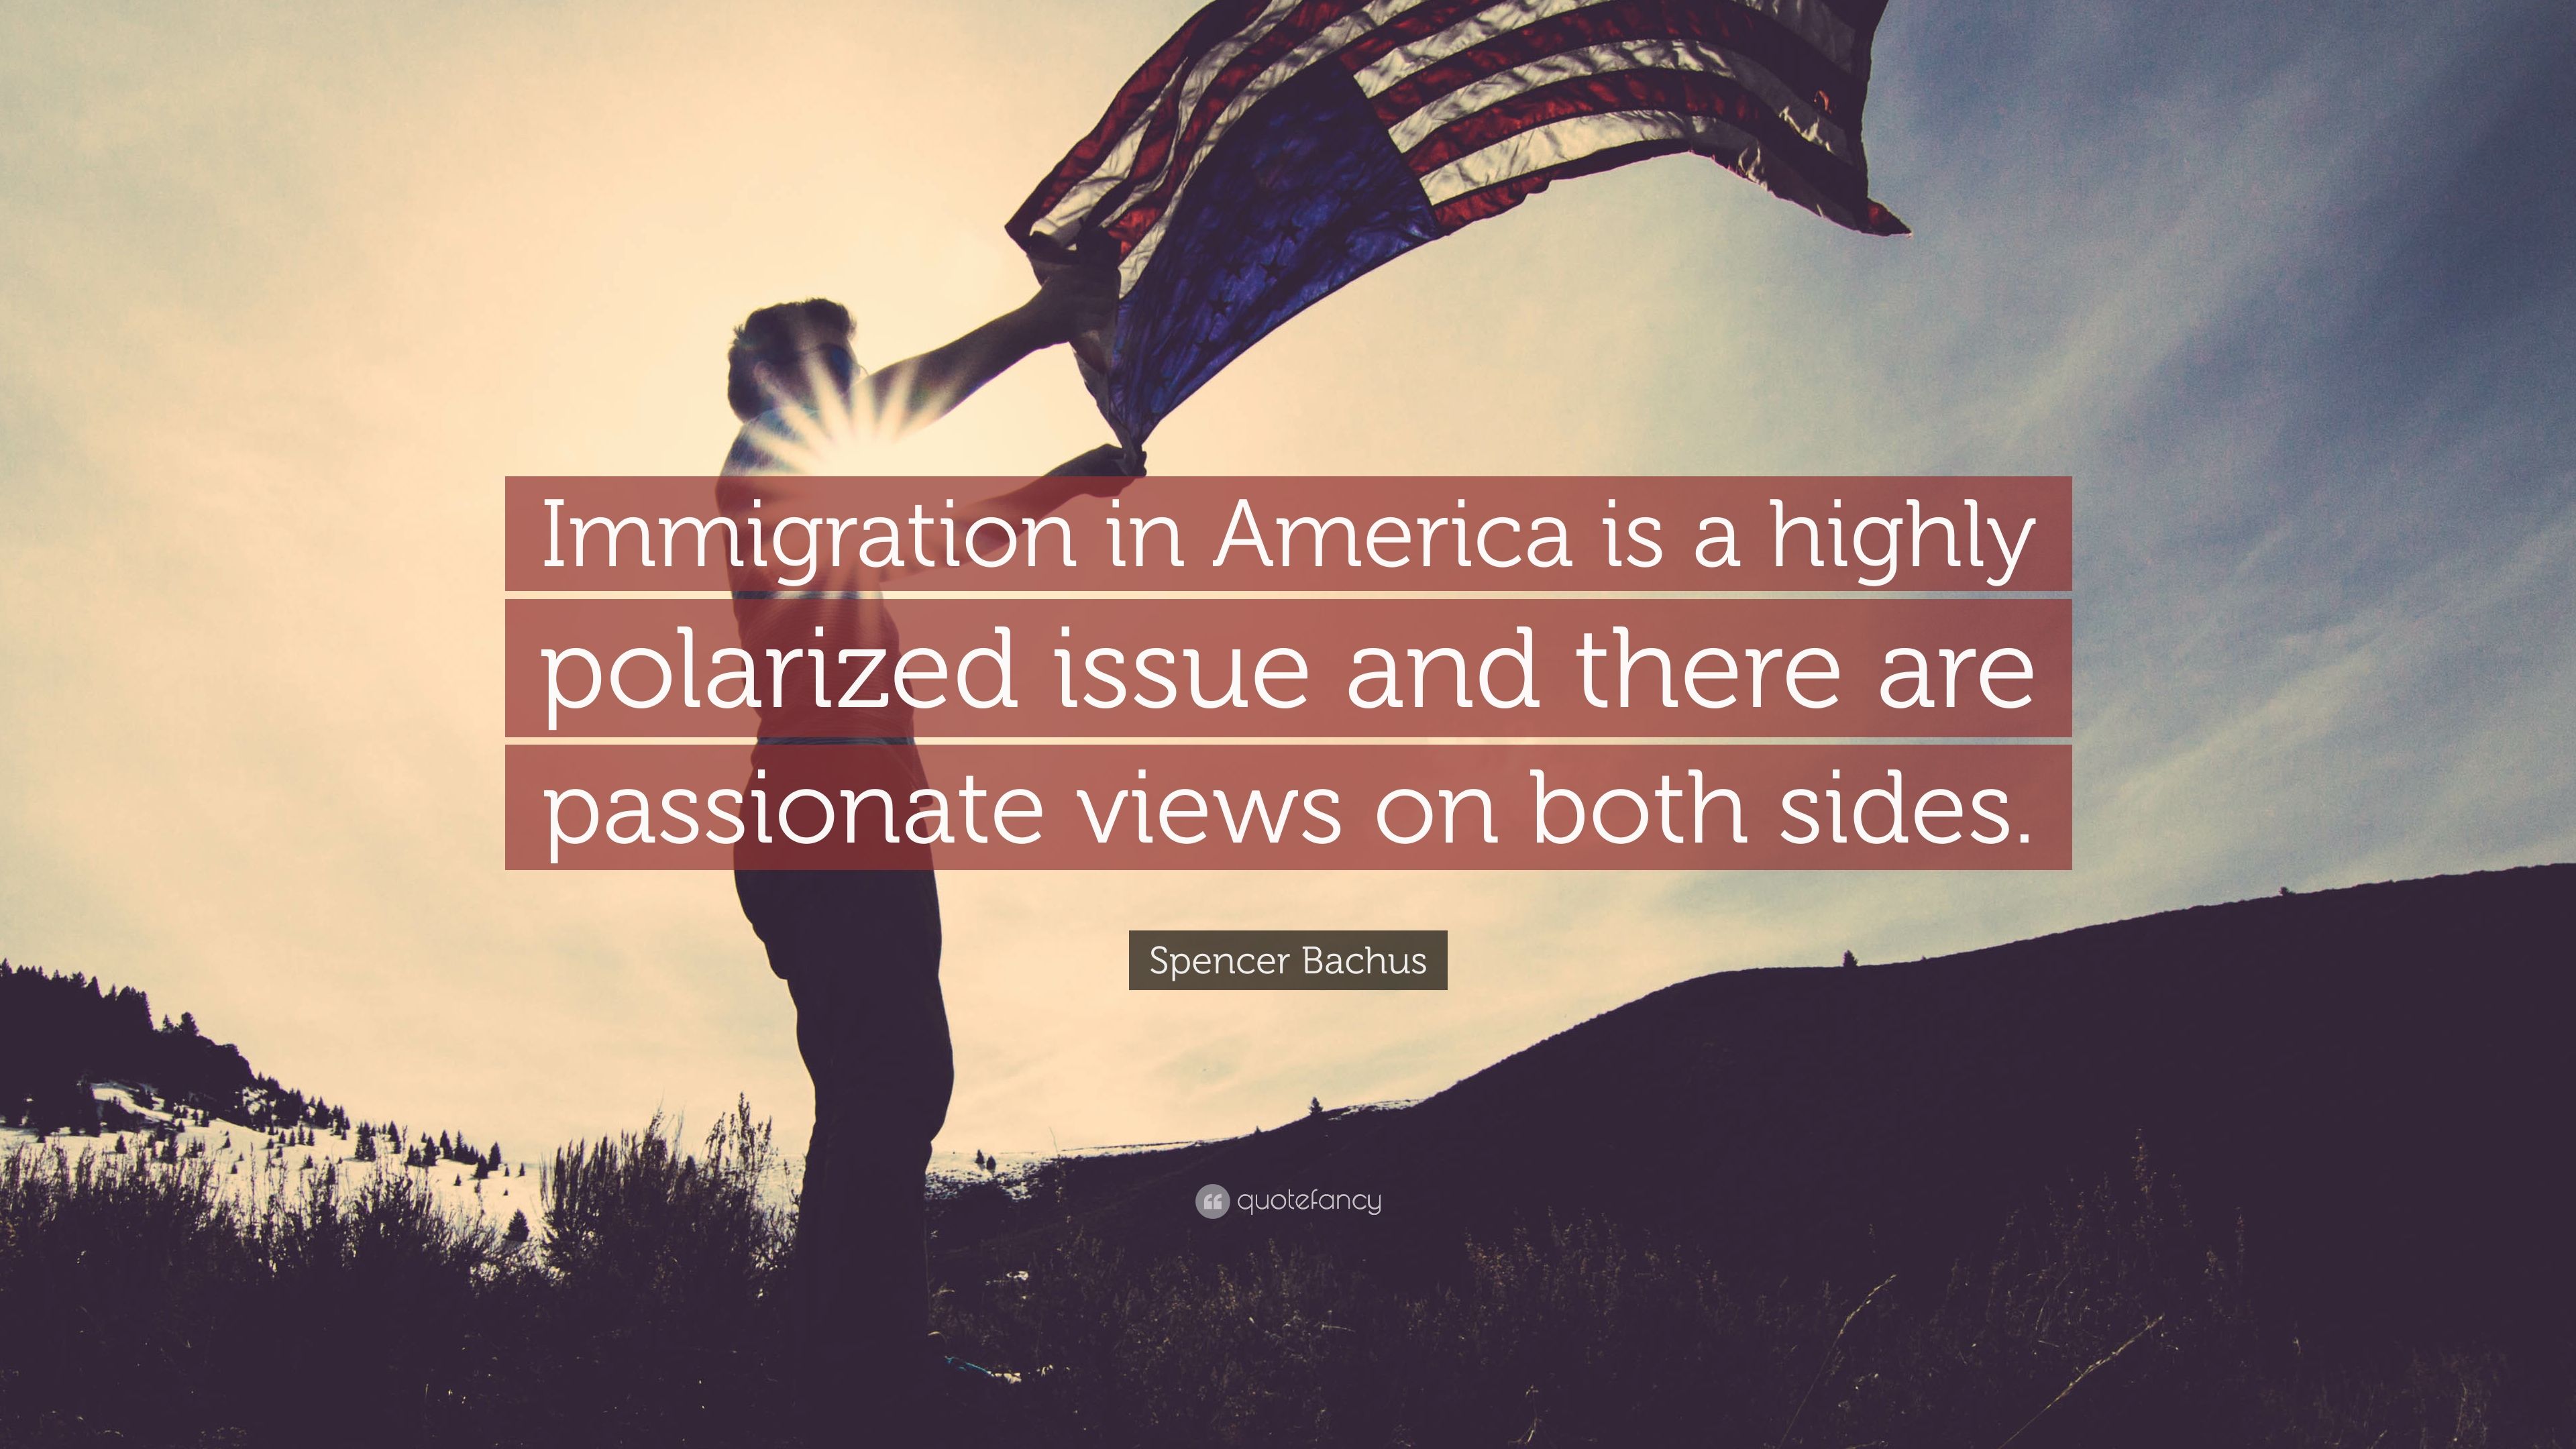 Spencer Bachus Quote: “Immigration in America is a highly polarized issue and there are passionate views on both sides.” (7 wallpaper)